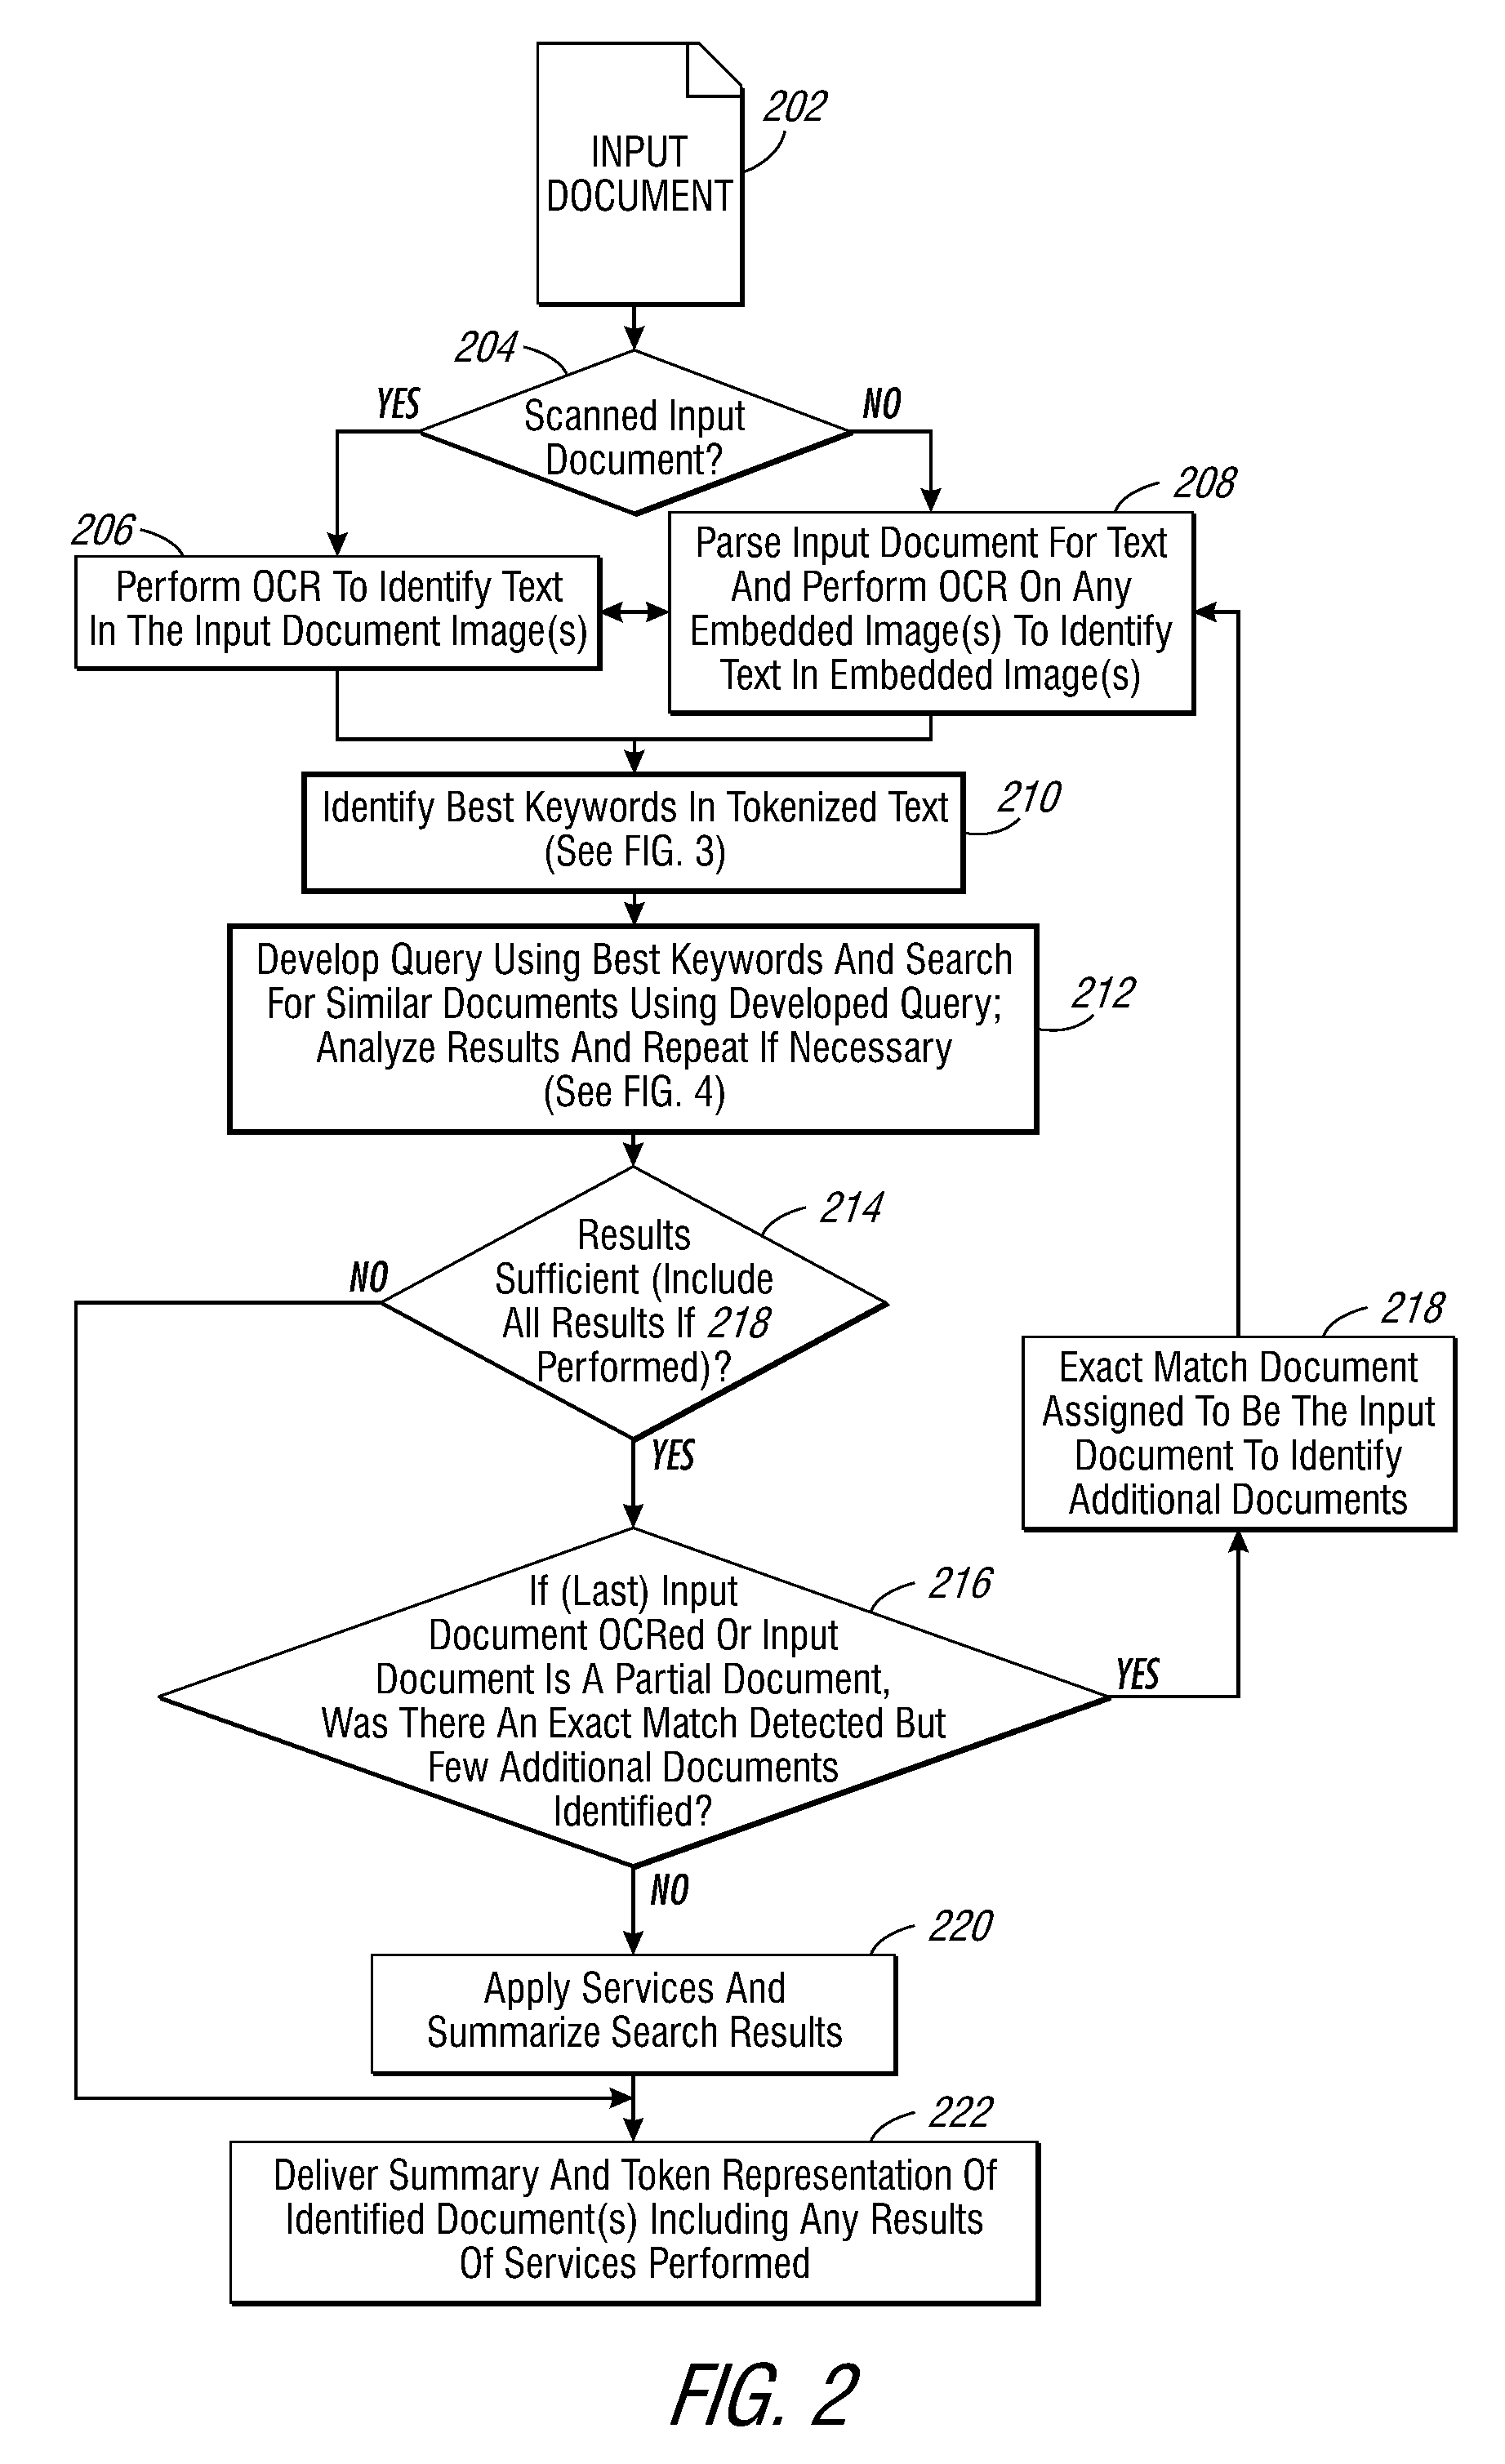 System and method for performing electronic information retrieval using keywords